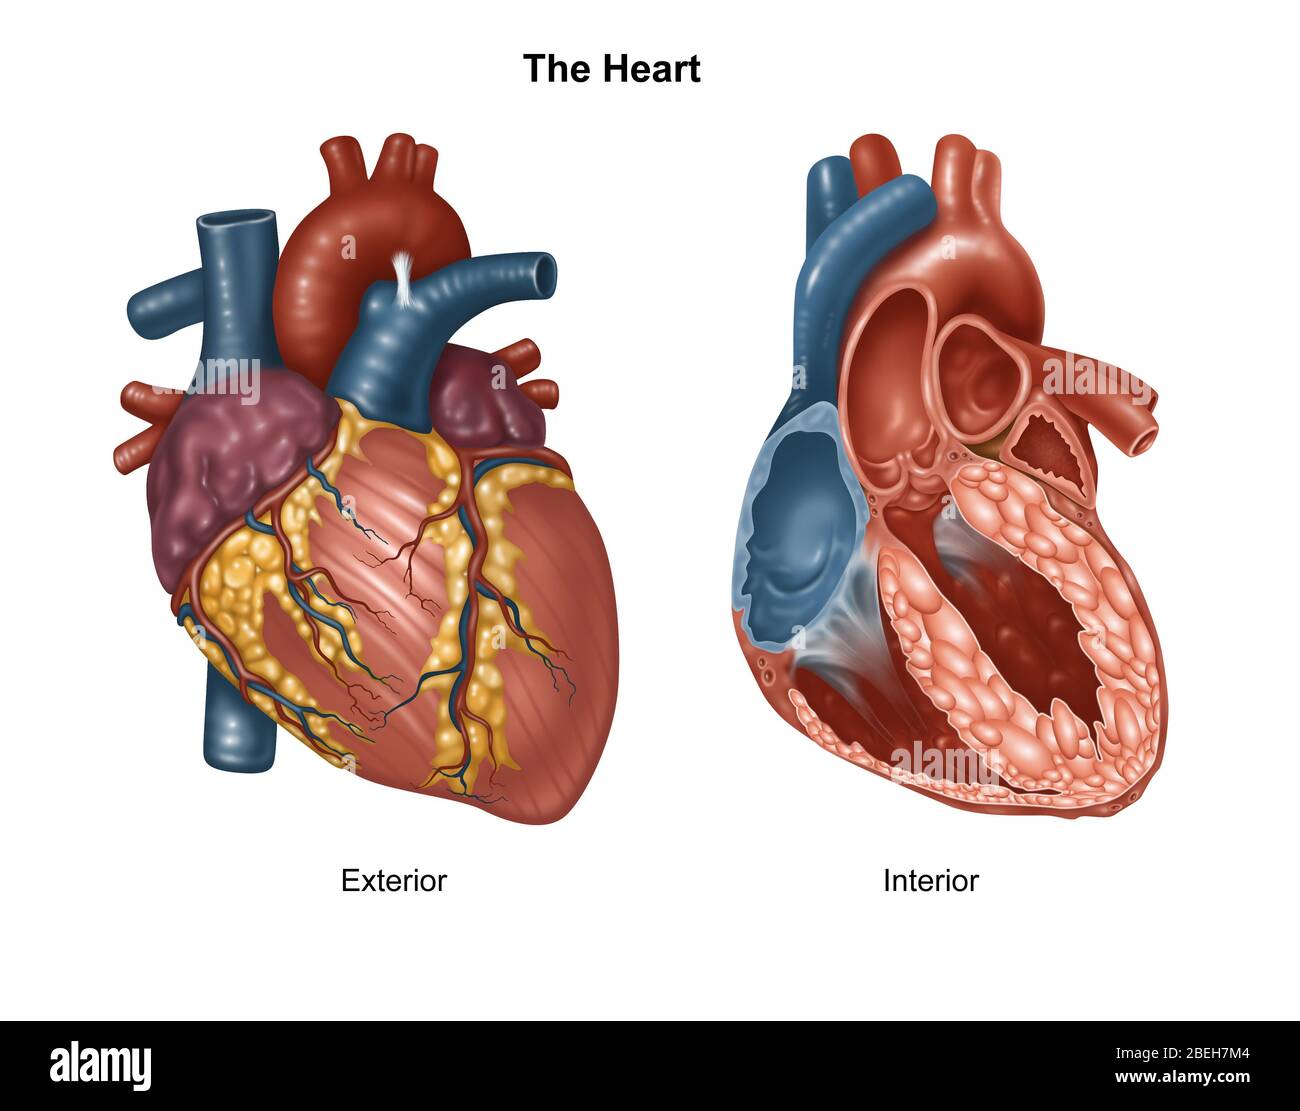 Normal Heart Exterior and Interior, Illustration Stock Photo